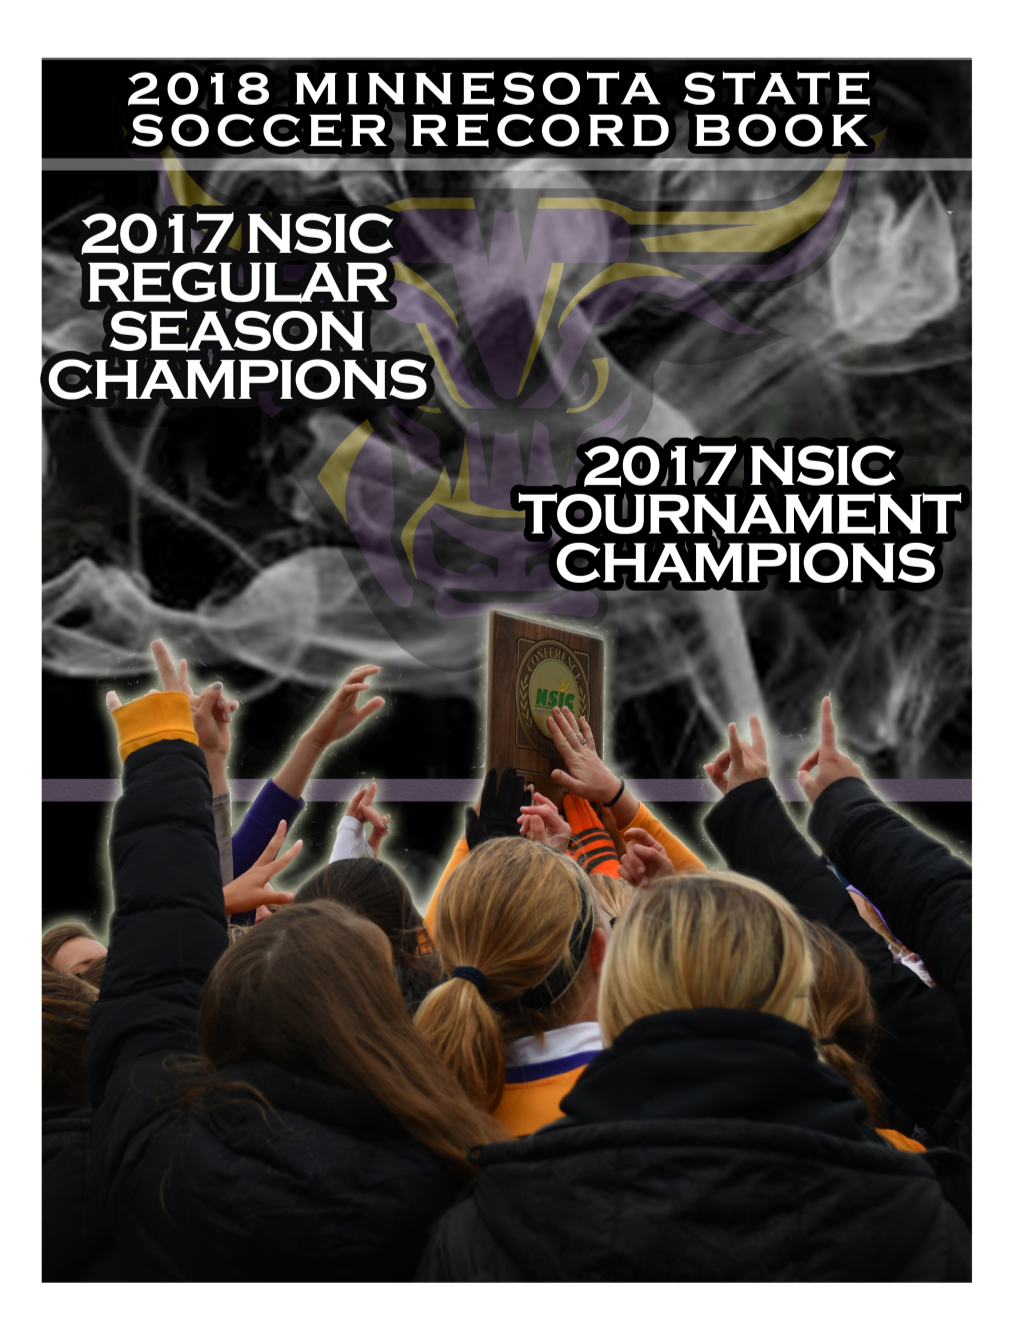 1 2018 Minnesota State Soccer TABLE of CONTENTS & MEDIA NOTES